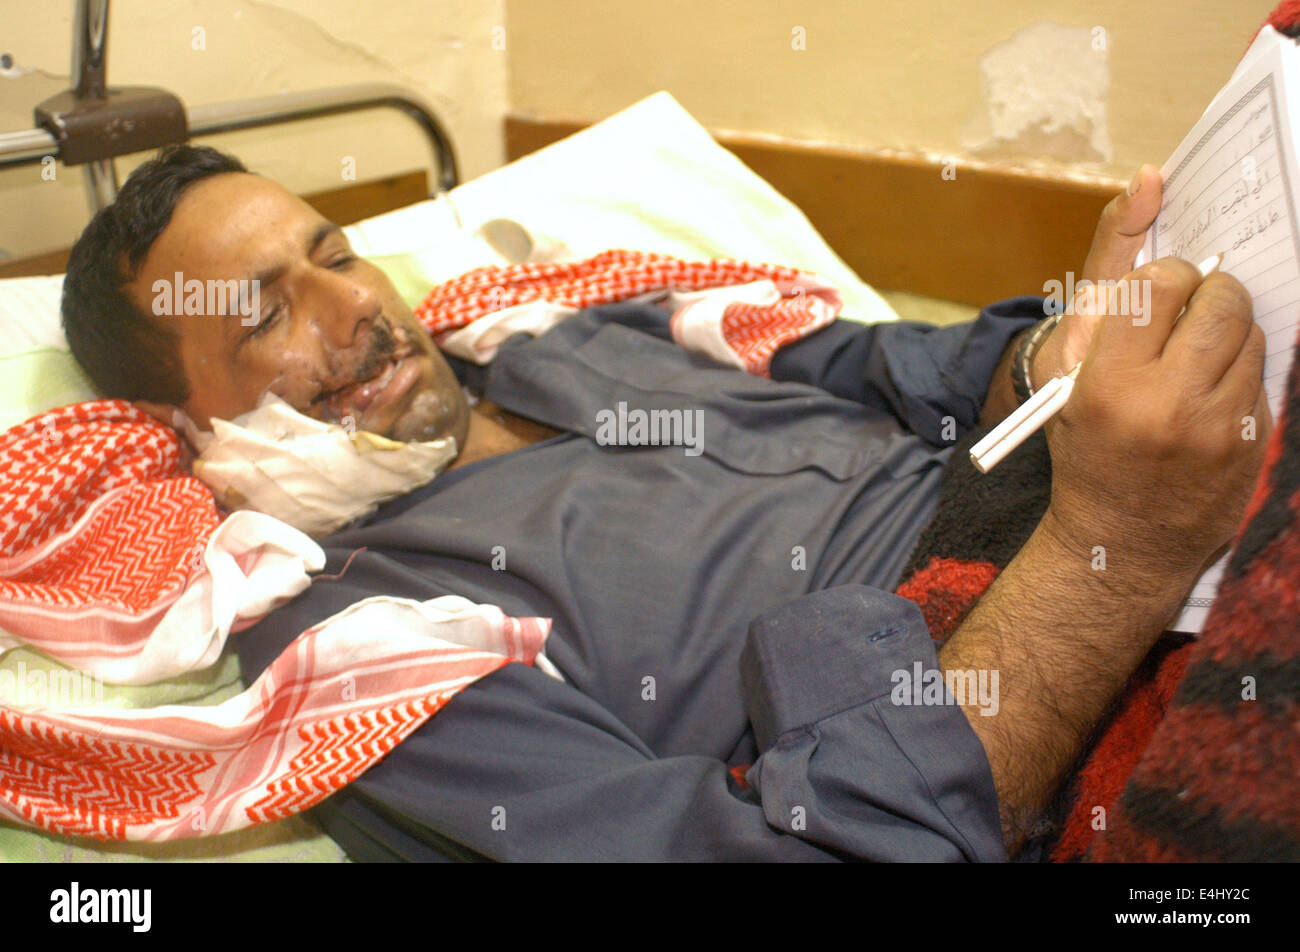 Al-Kharj Hospital. In one of the operating rooms, an Iraqi surgeon and his medical team comes for the extraction of a low caliber bullet that remains lodged in the jaw Karim. Stock Photo